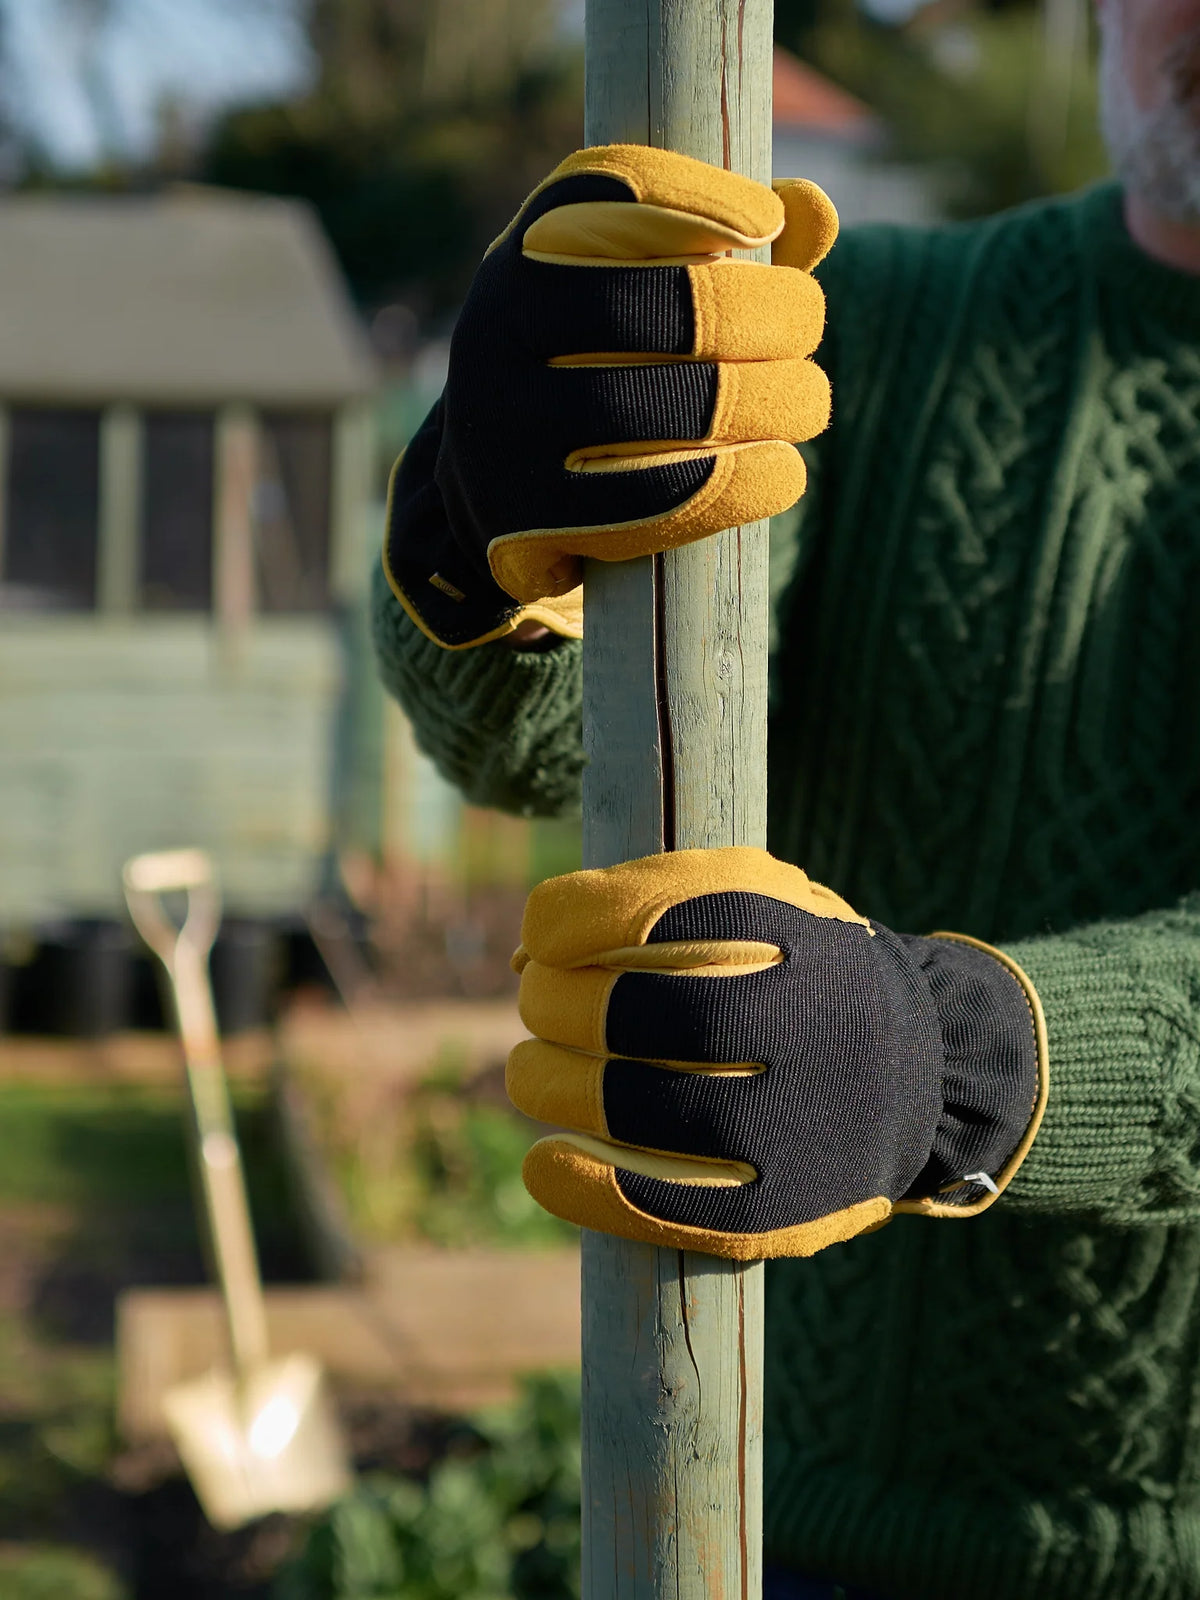 GOLD LEAF WINTER TOUCH GLOVES, MENS